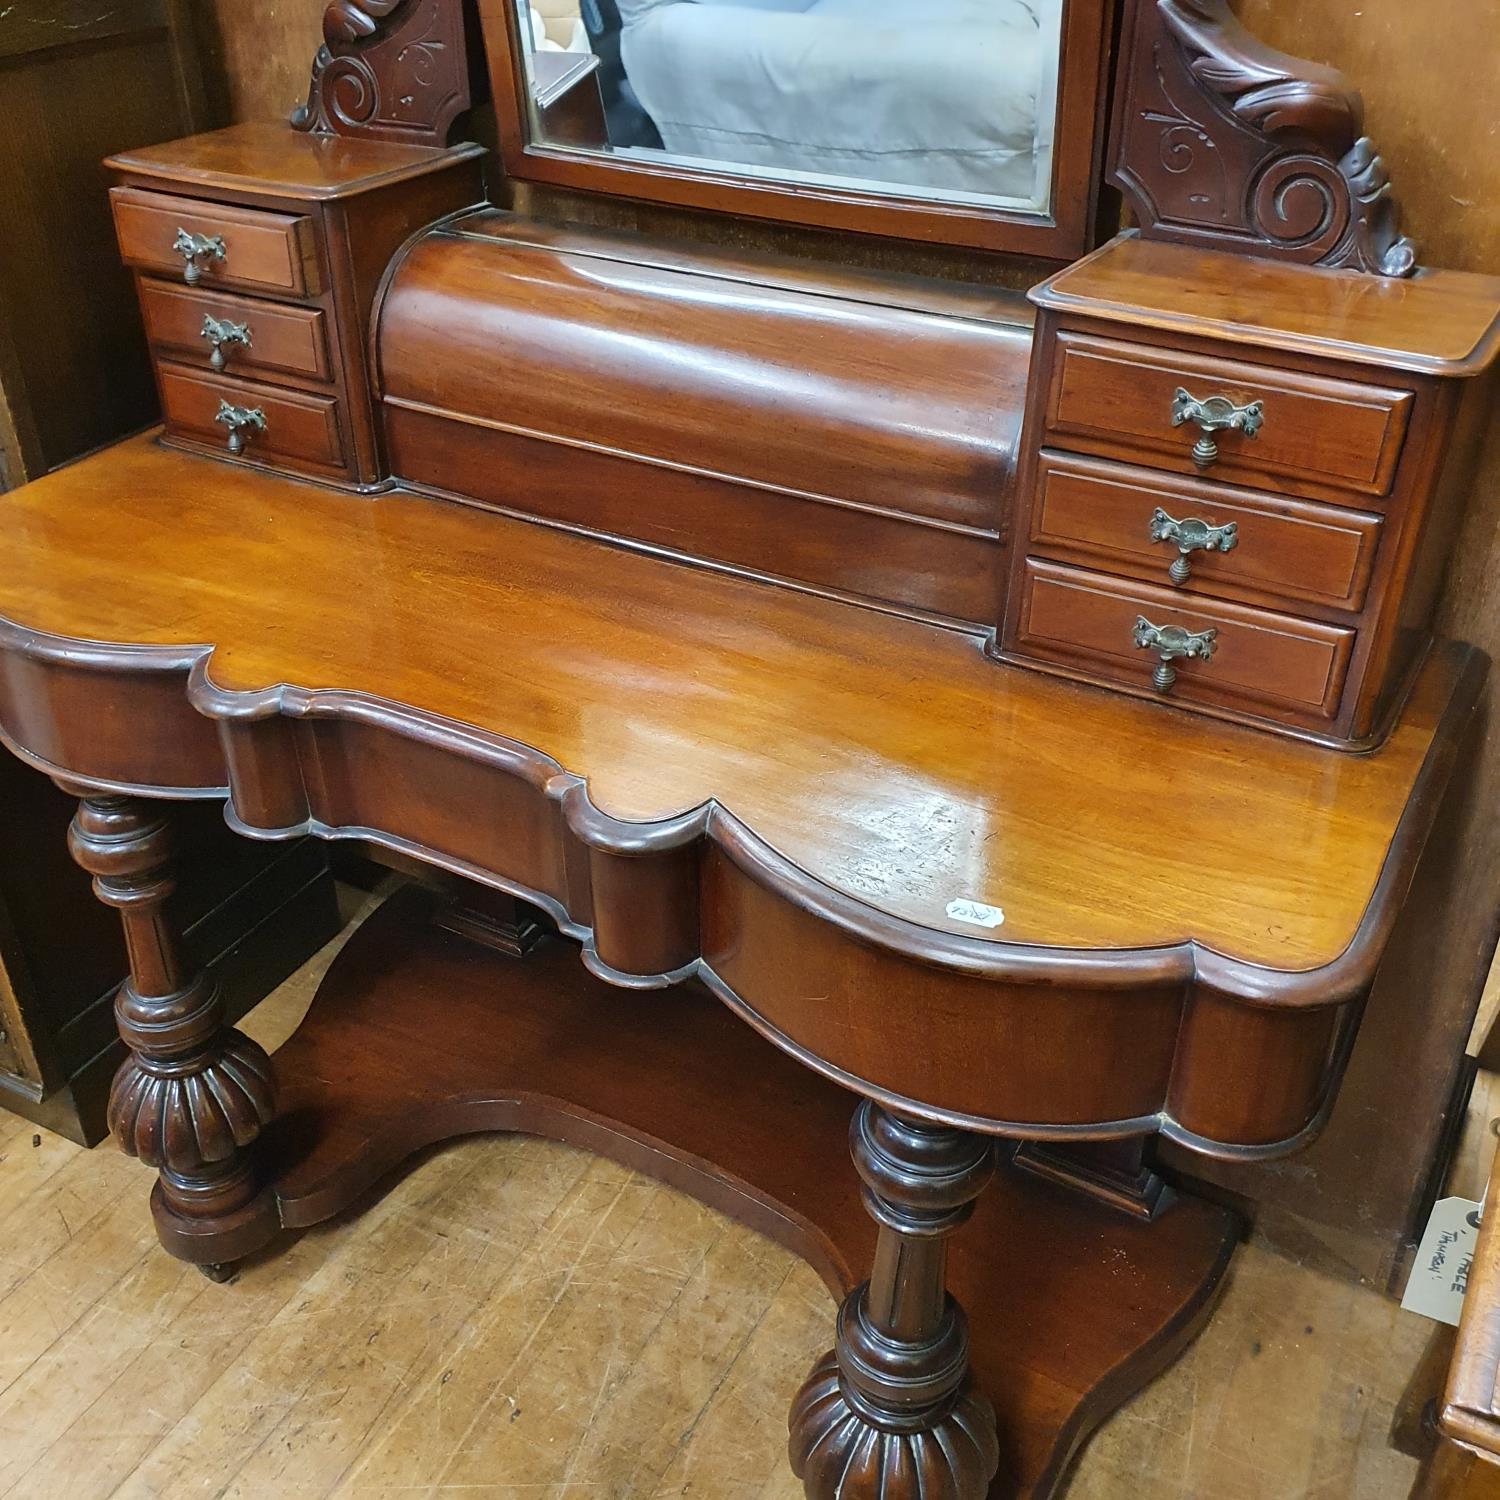 A 19th century Duchess mahogany dressing table, 120 cm wide - Image 2 of 2